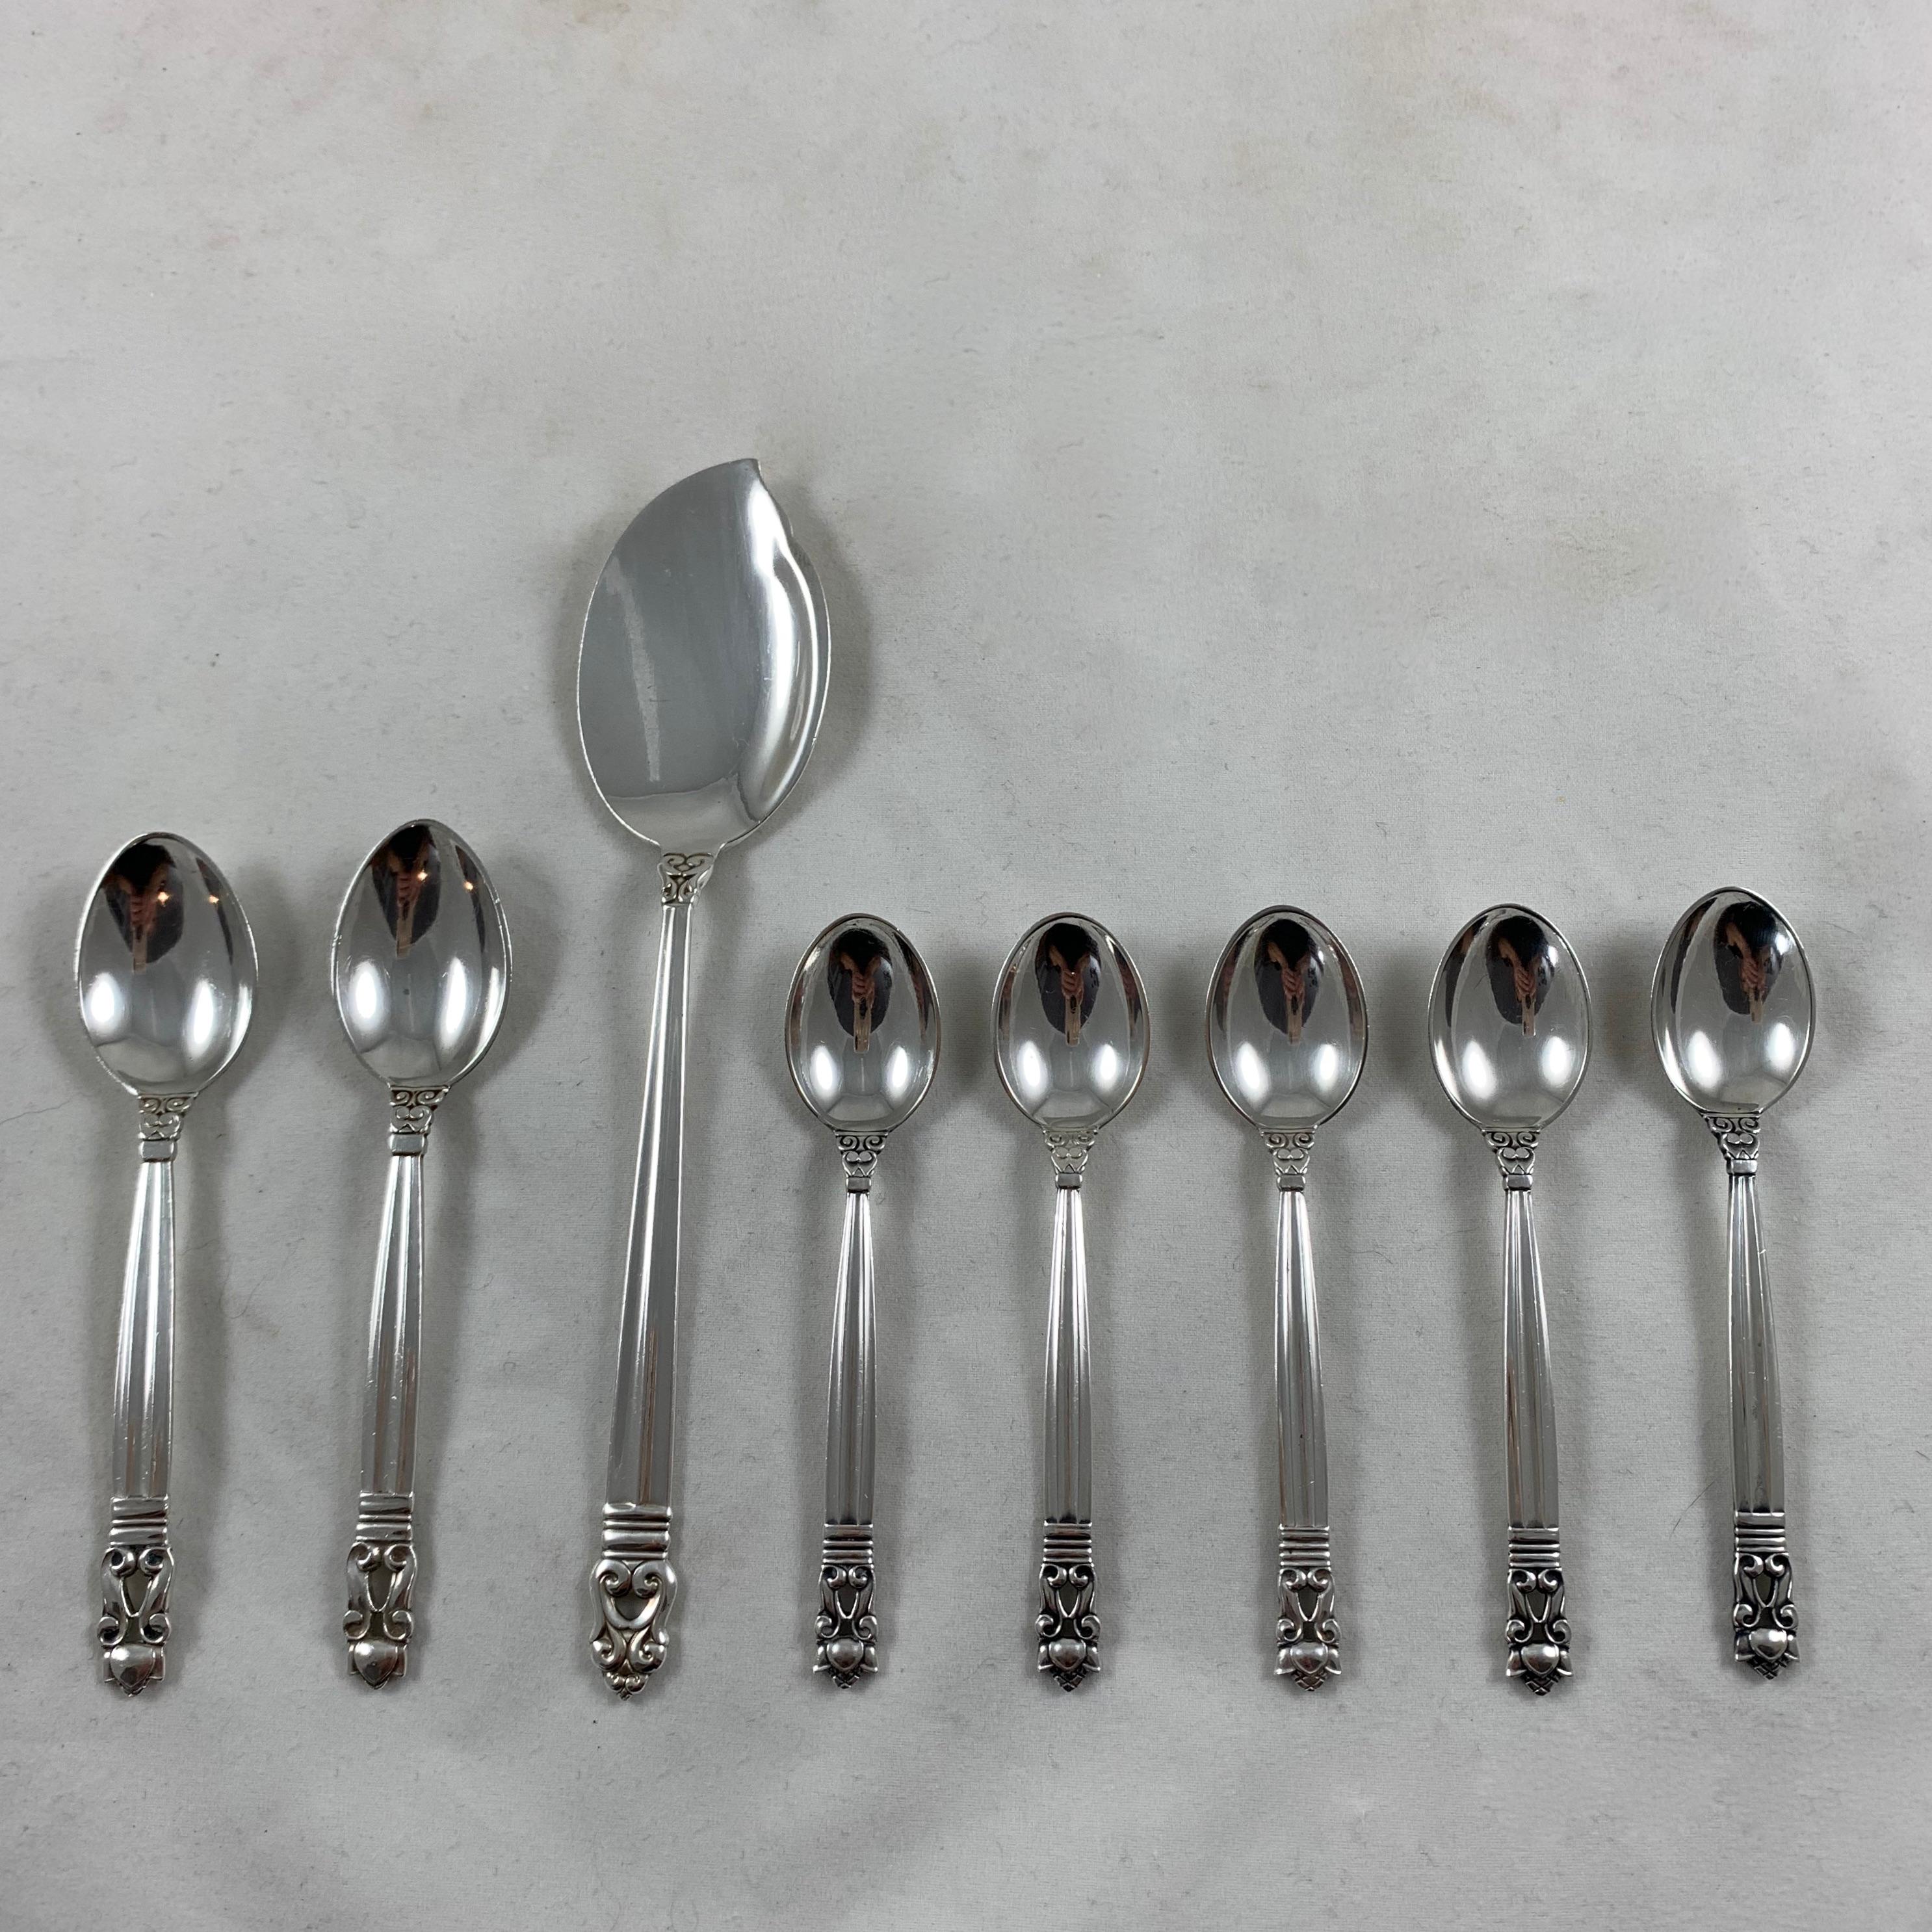 An assembled sterling silver breakfast service, consisting of a pastry server, two jam spoons and five mocha spoons - a set of eight in the Classic acorn pattern.

Measure: One pasty server 6.5 in. L x 1 3/8 W
Five mocha spoons 3.75 in. L x .75